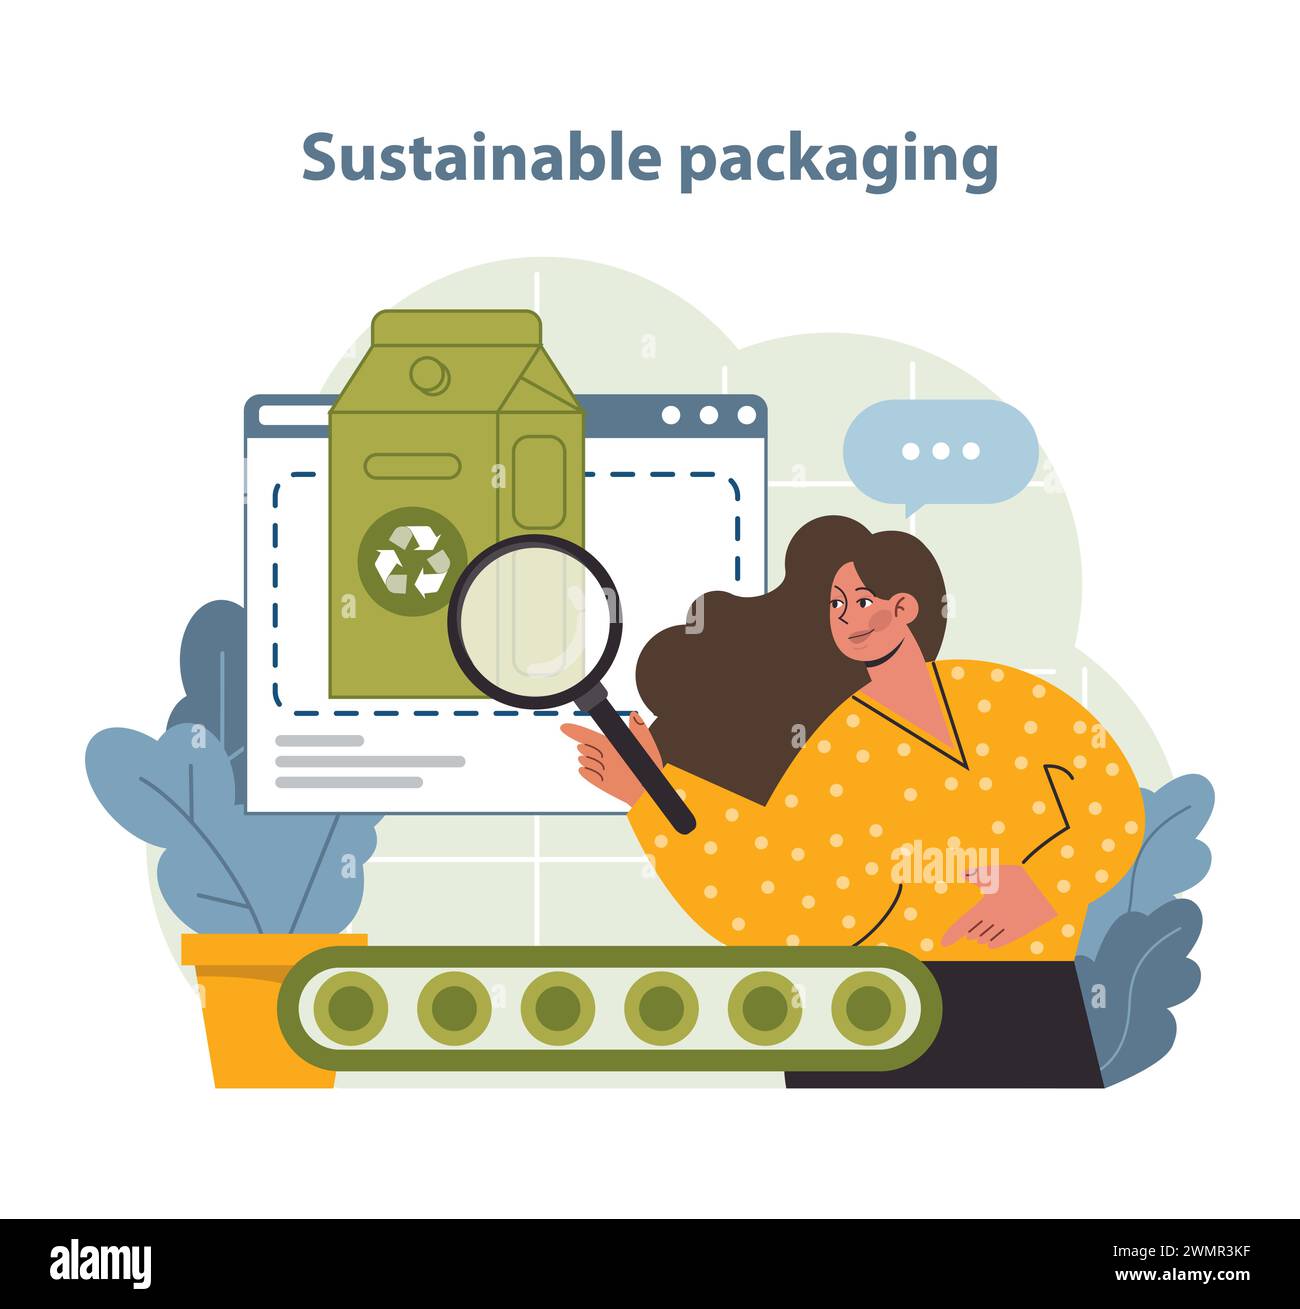 Sustainable Packaging Vector Illustration. An individual examines eco-friendly packaging options, symbolizing the scrutiny and choice in sustainable consumerism. Stock Vector